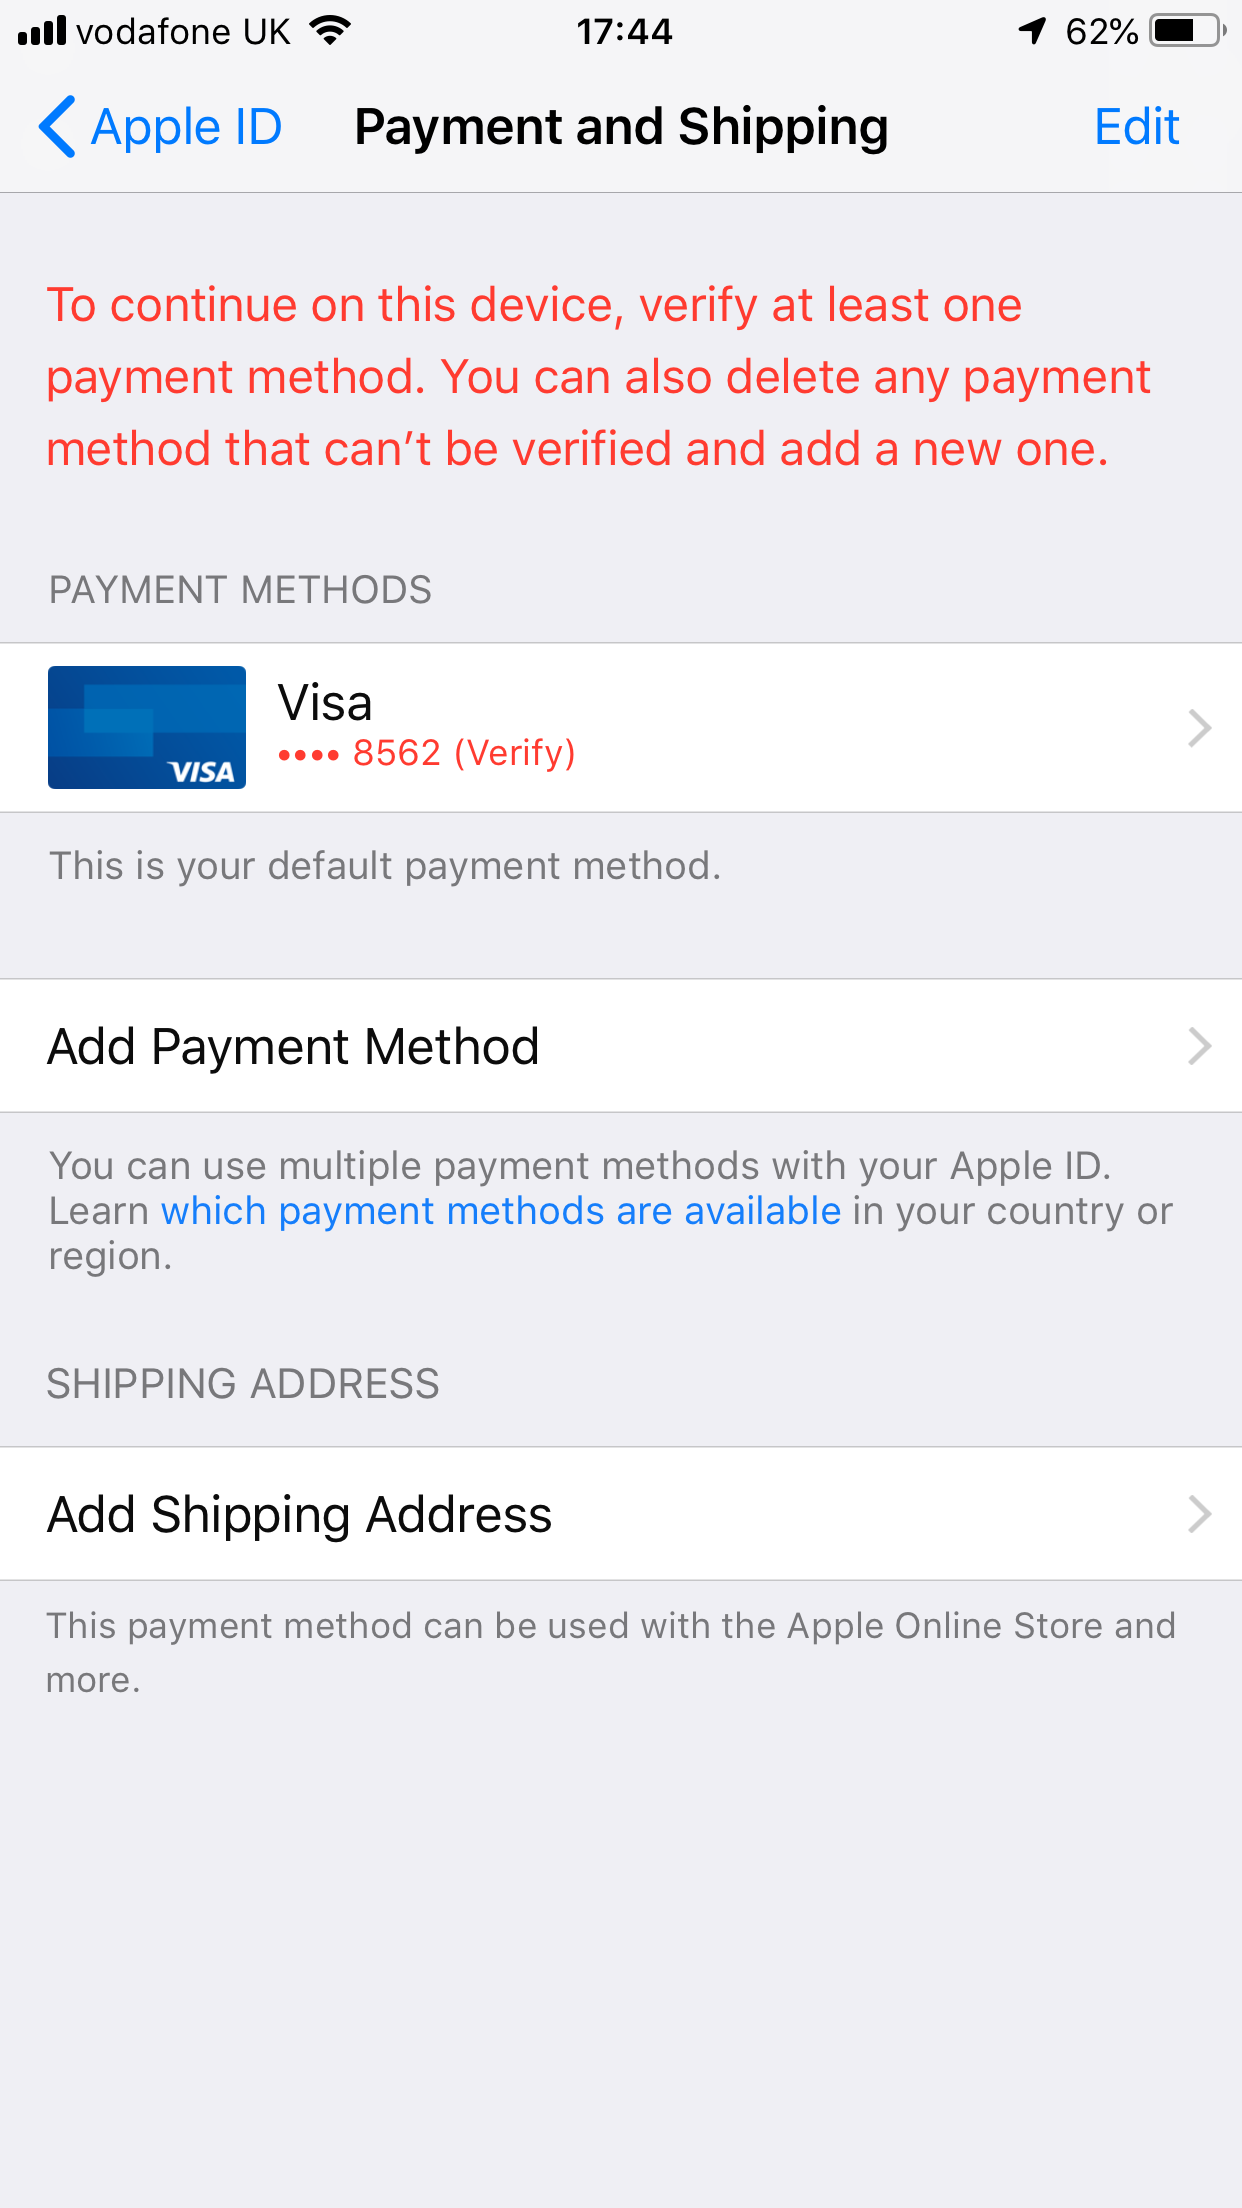 Why can't I remove payment method on Apple?